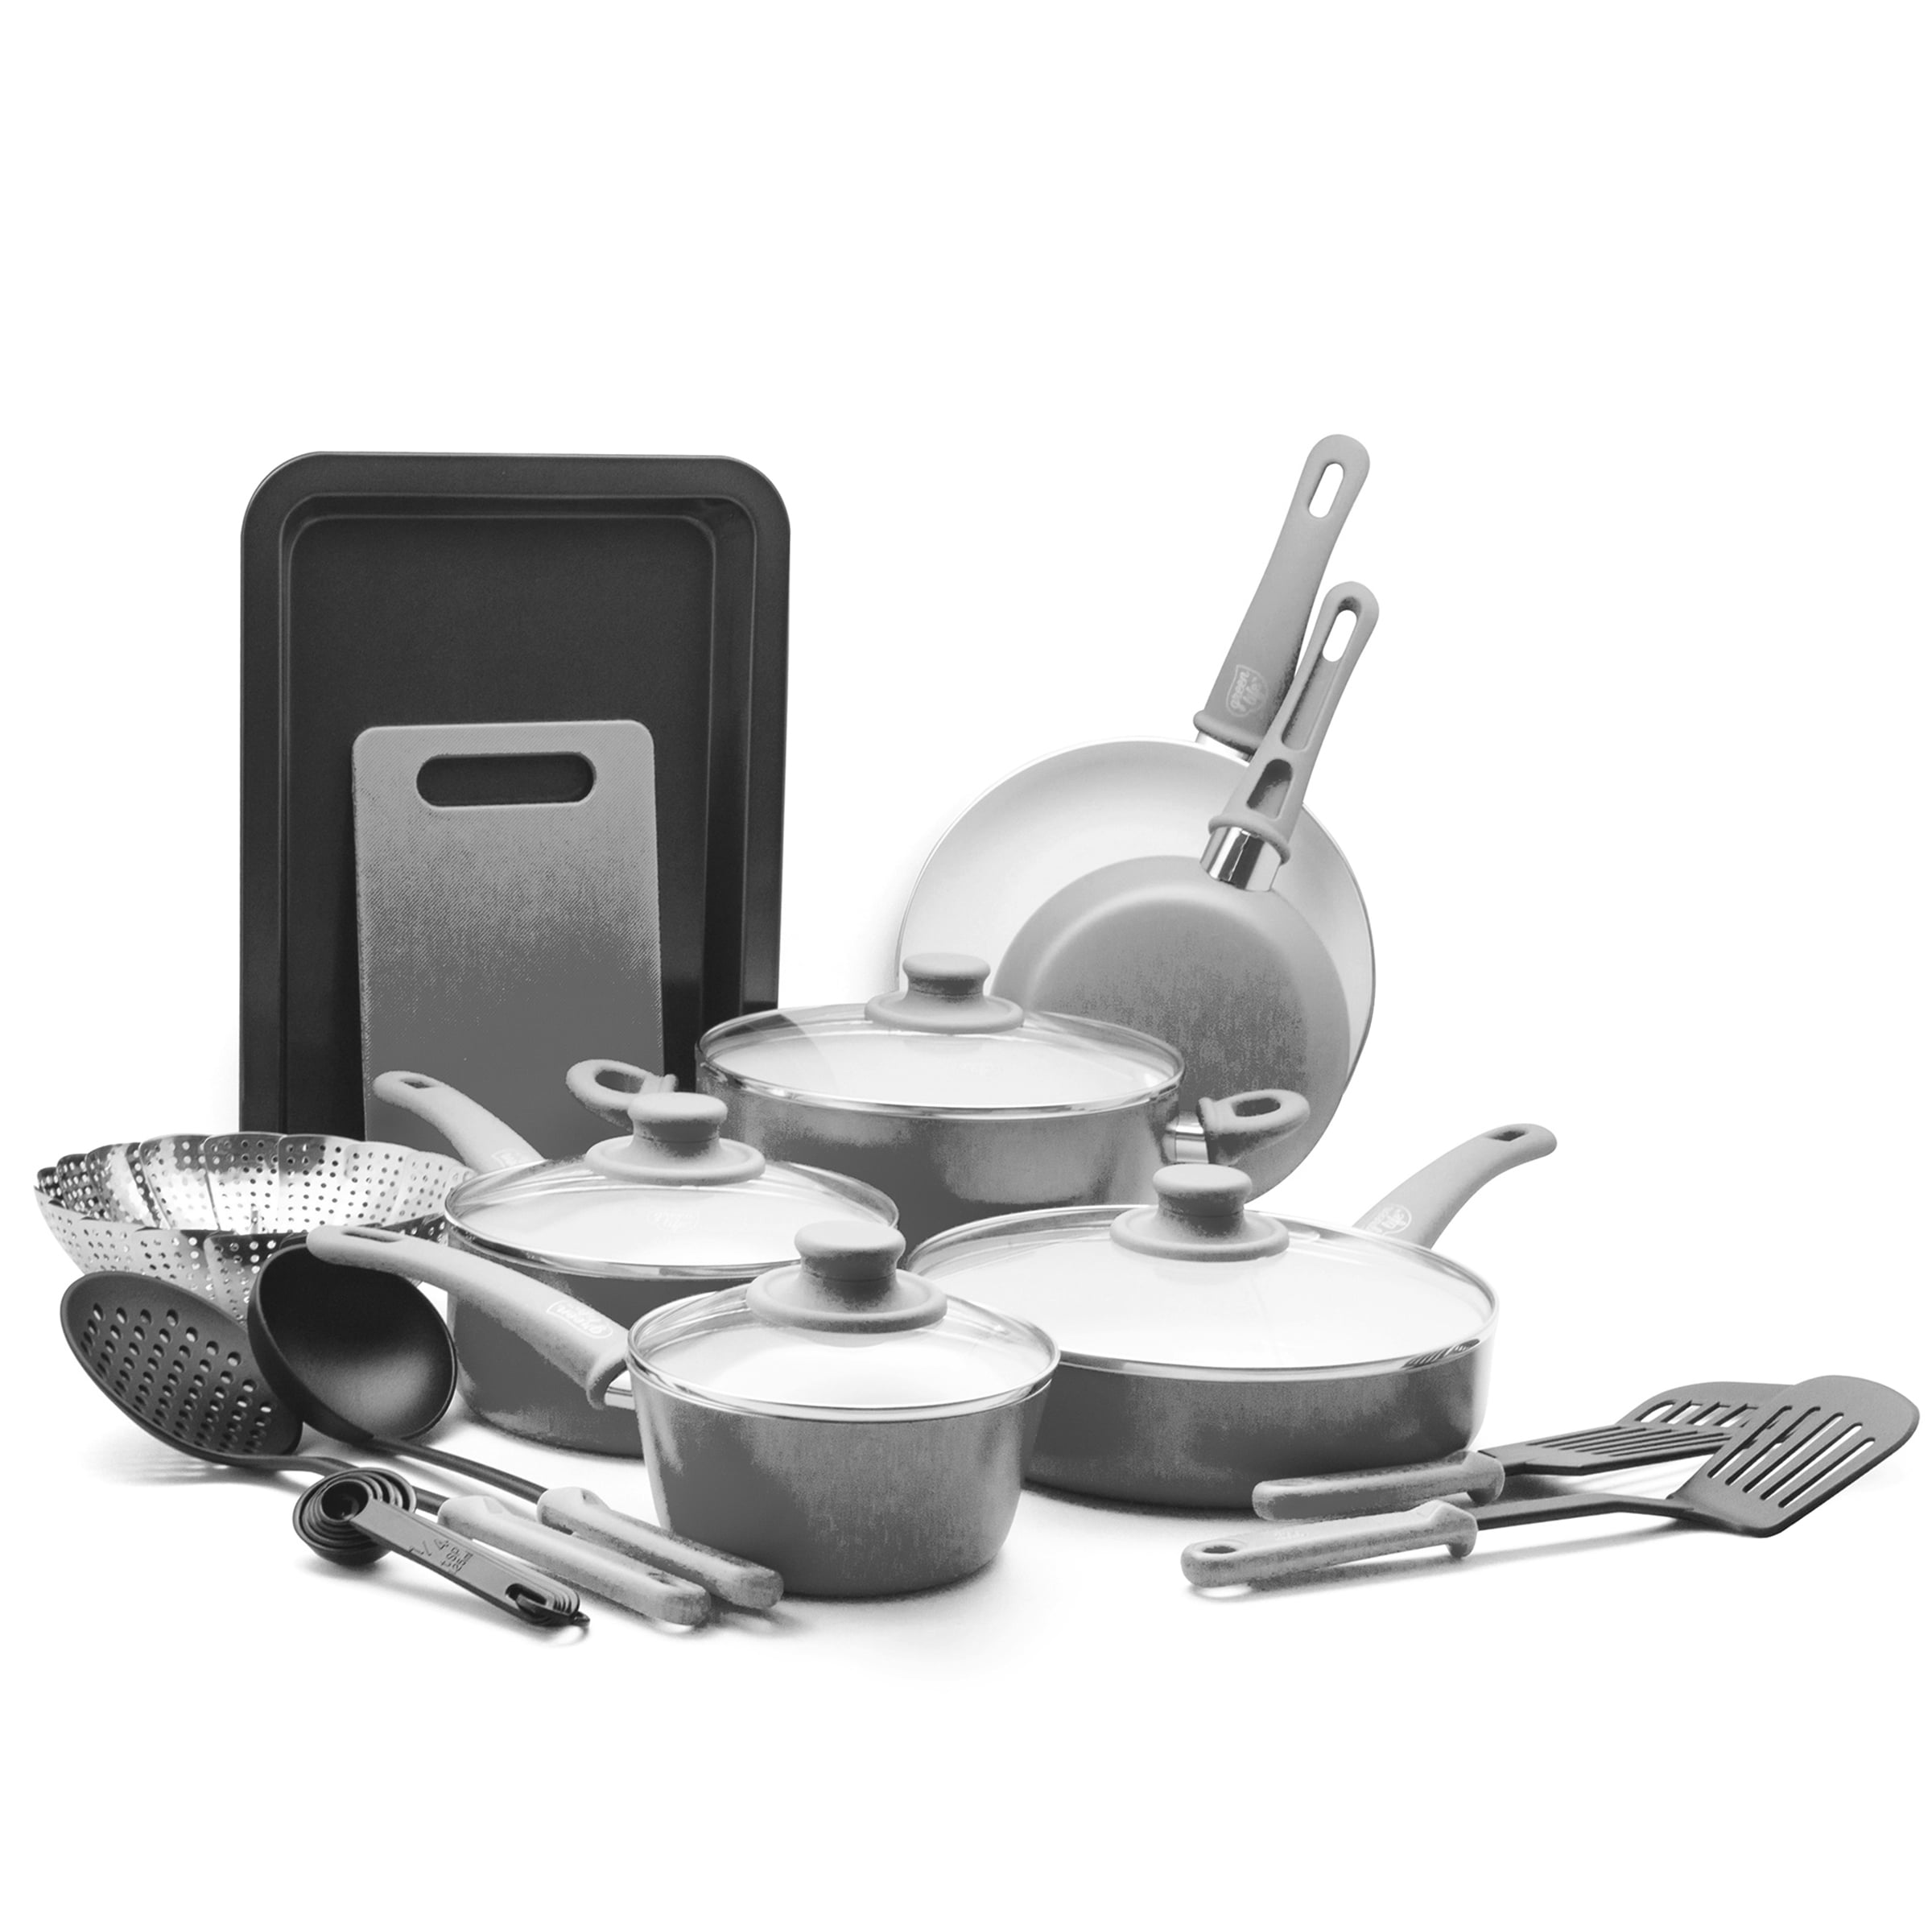 GreenLife 18-Piece Soft Grip Toxin-Free Healthy Ceramic Non-stick Cookware  Set, Gray